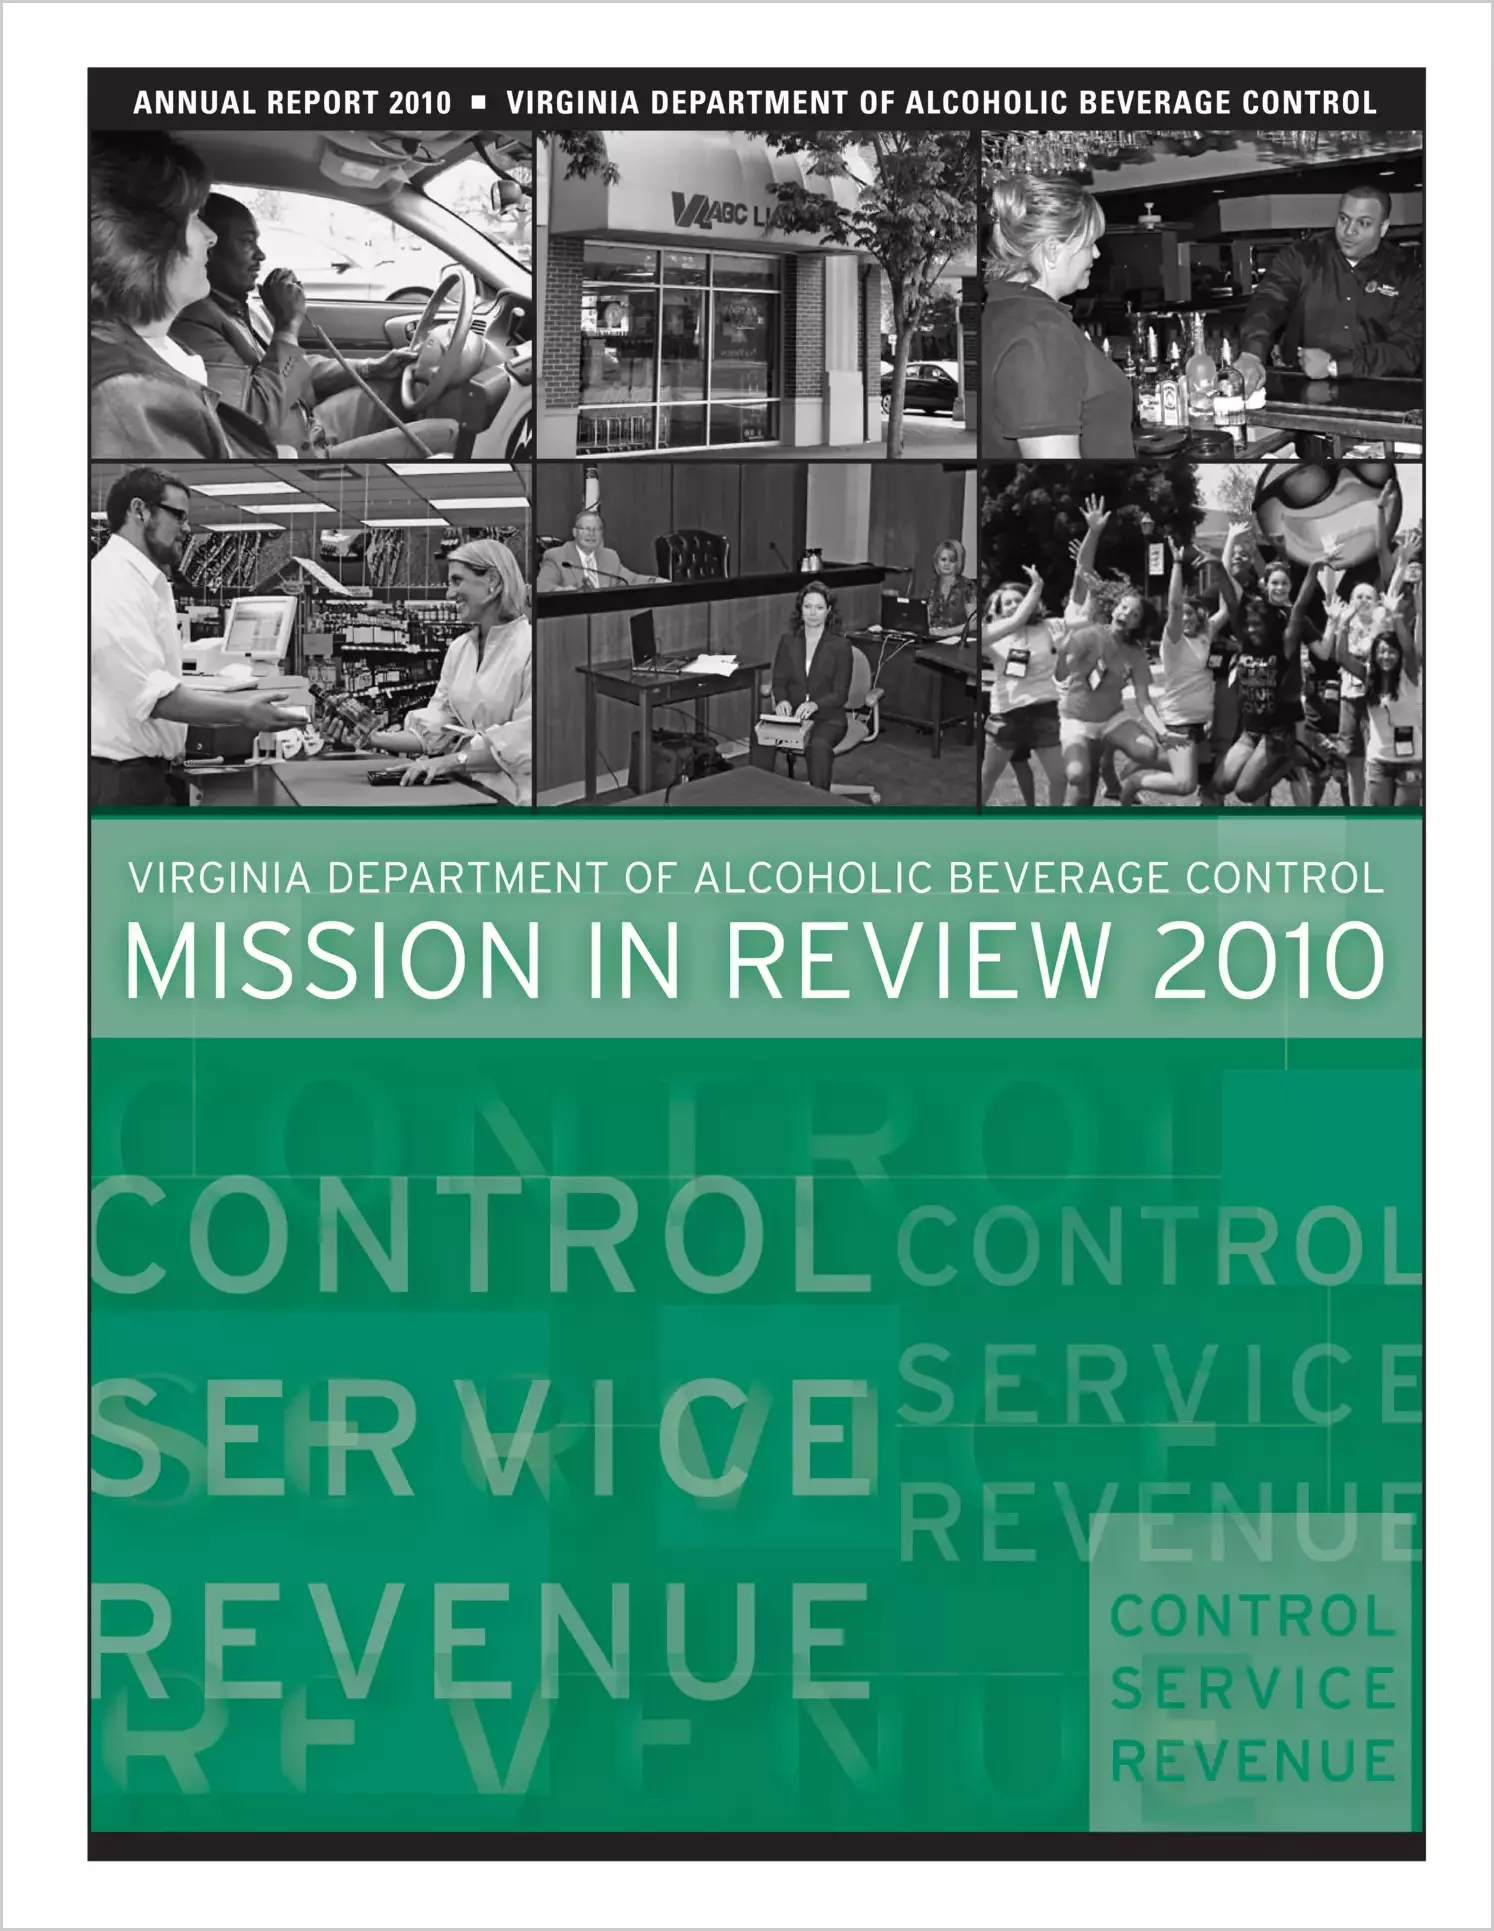 Department of Alcoholic Beverage Control Annual Report 2010